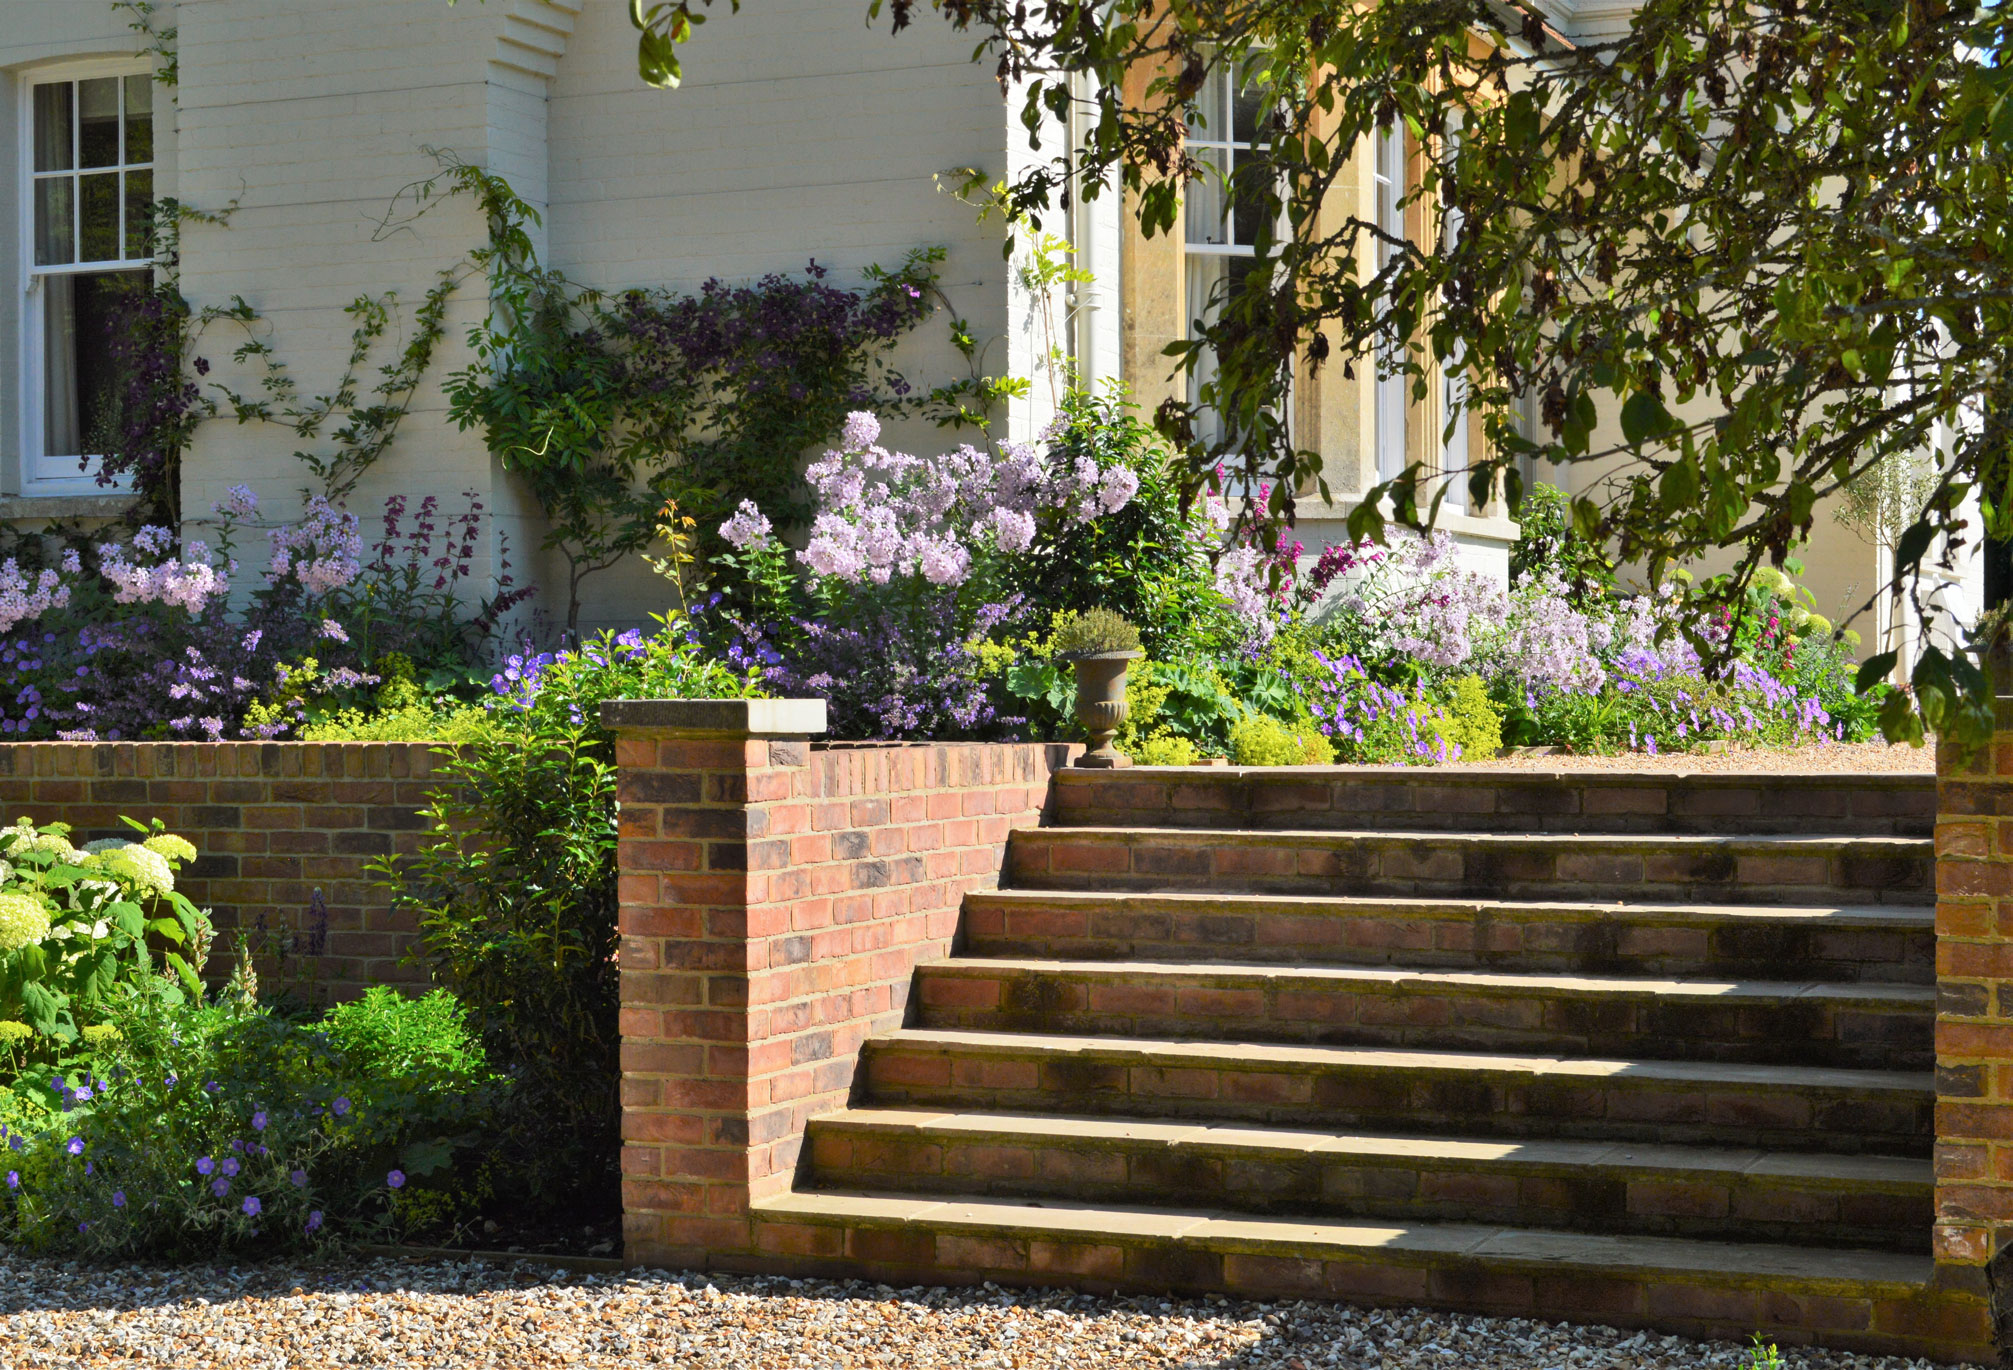 Landscape design with brick and stone steps